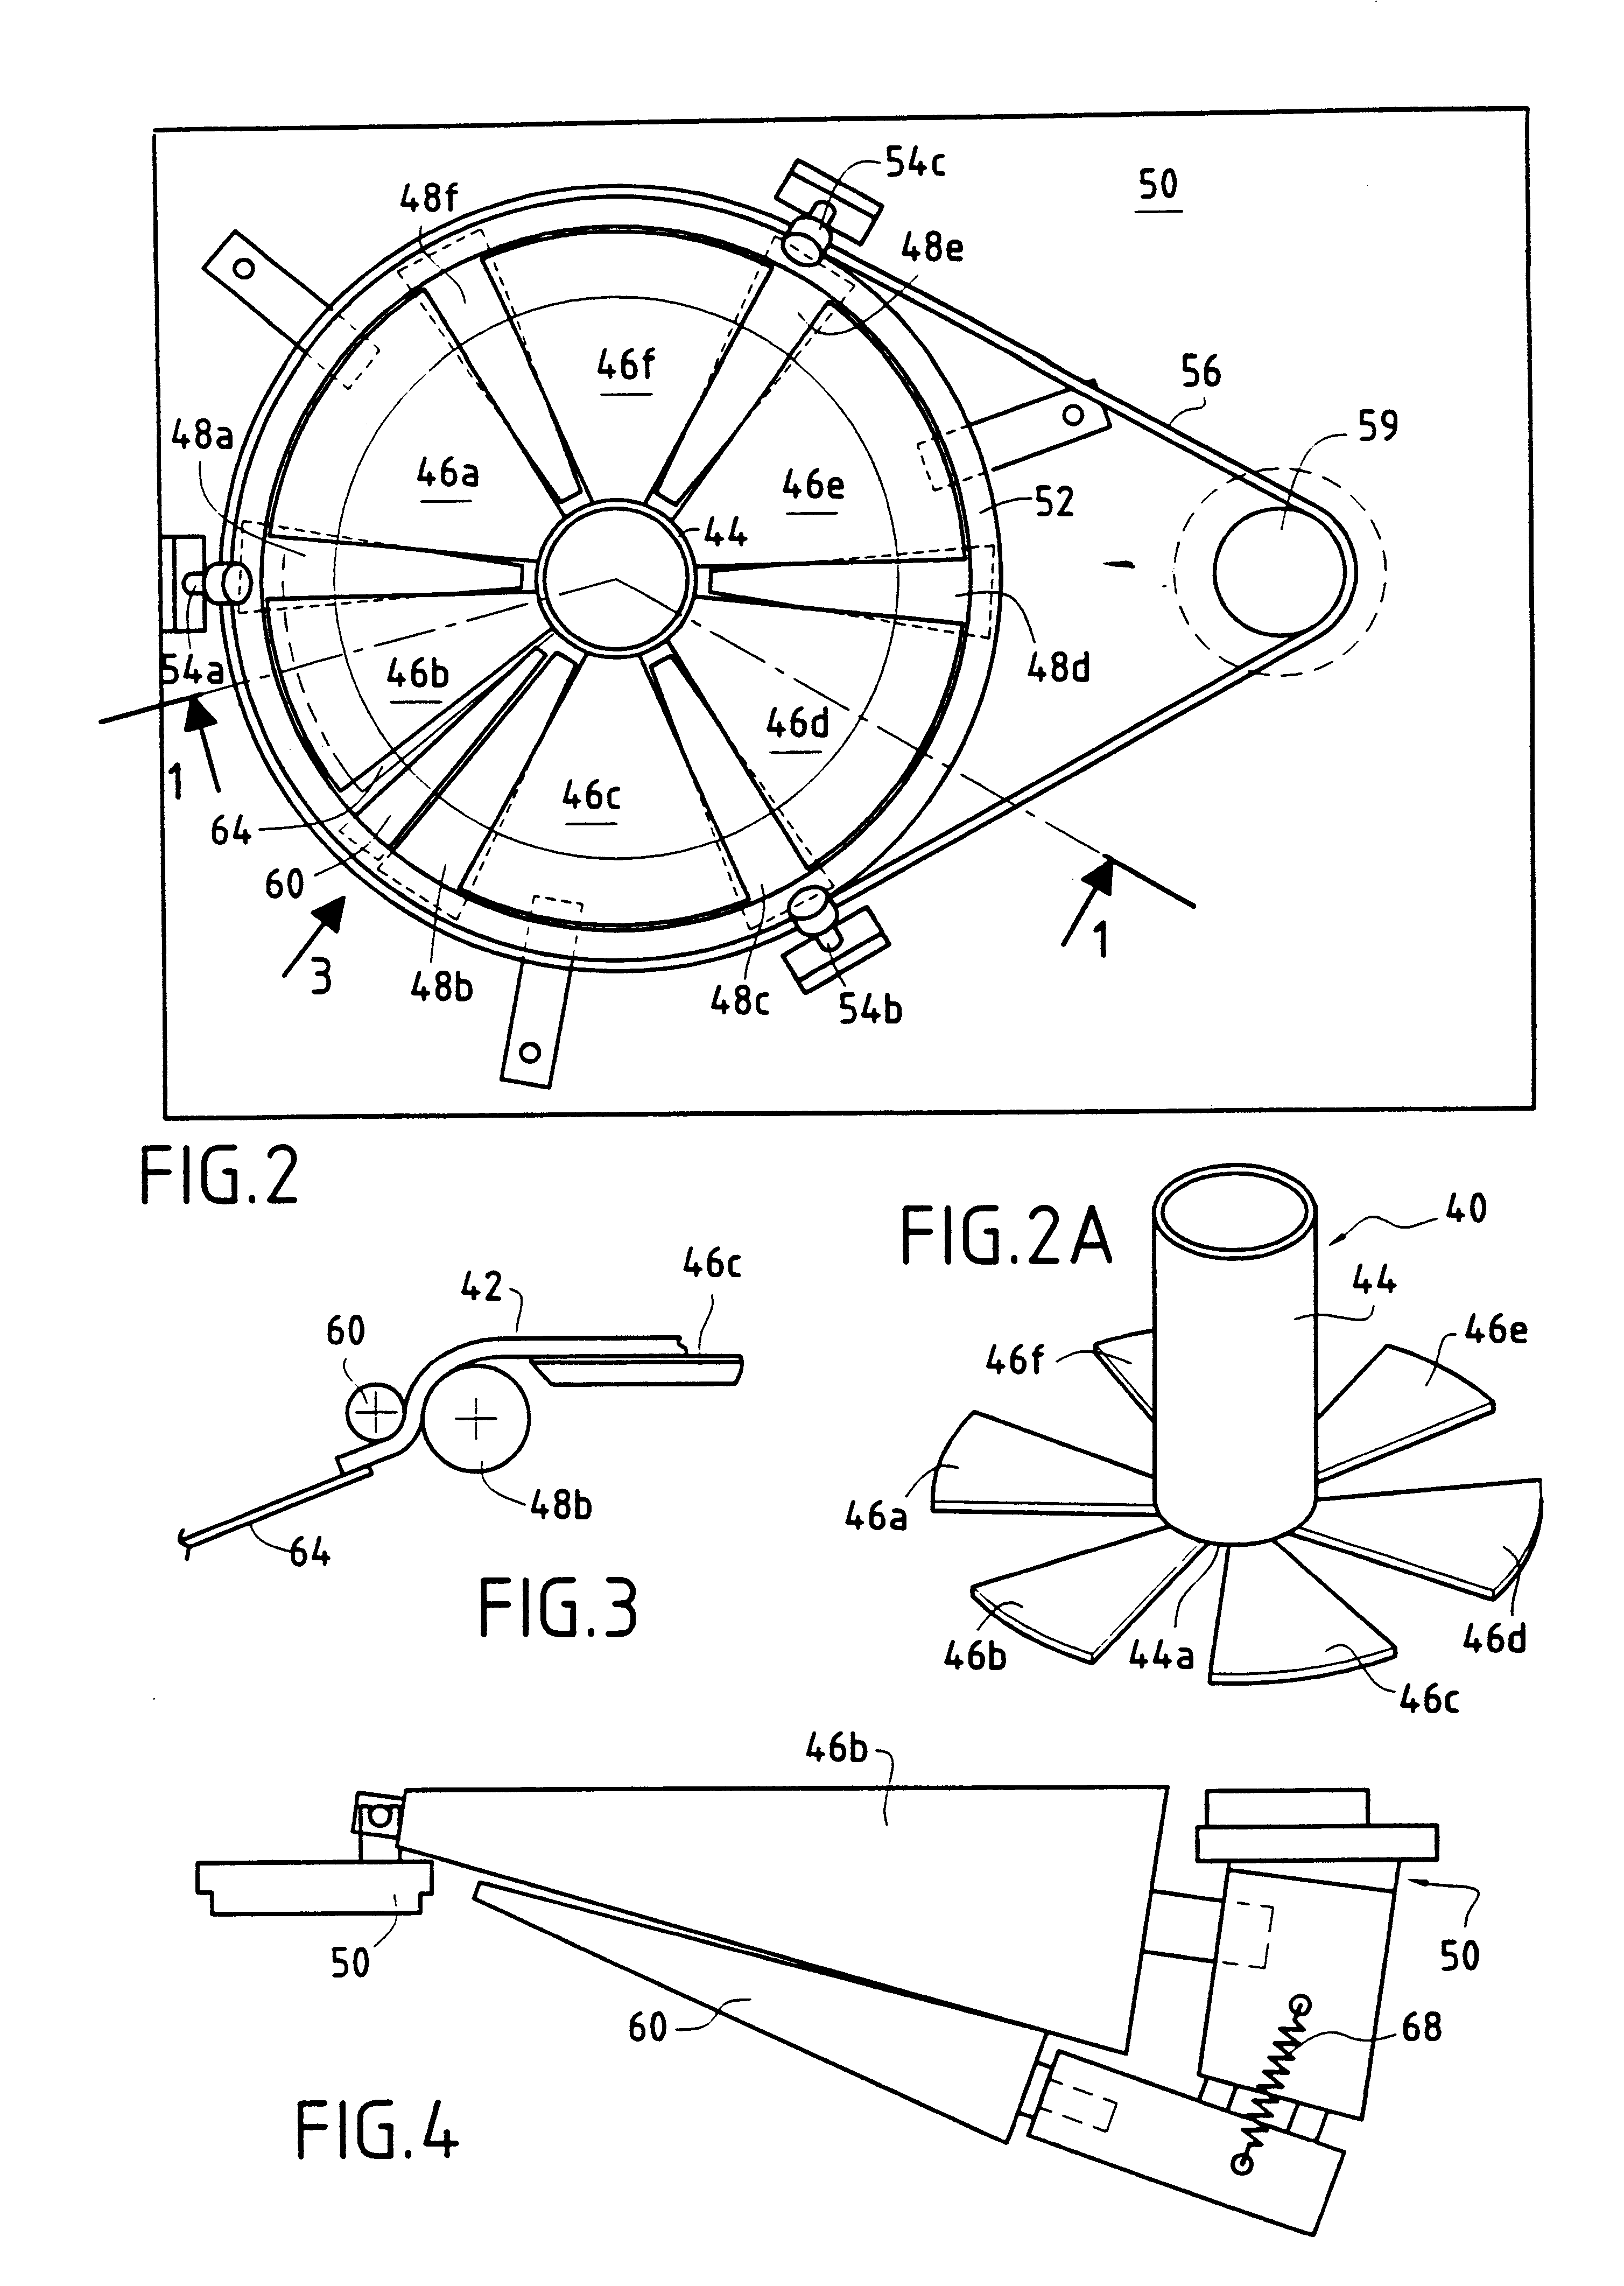 Feeding a needling machine with a continuous spiral strip